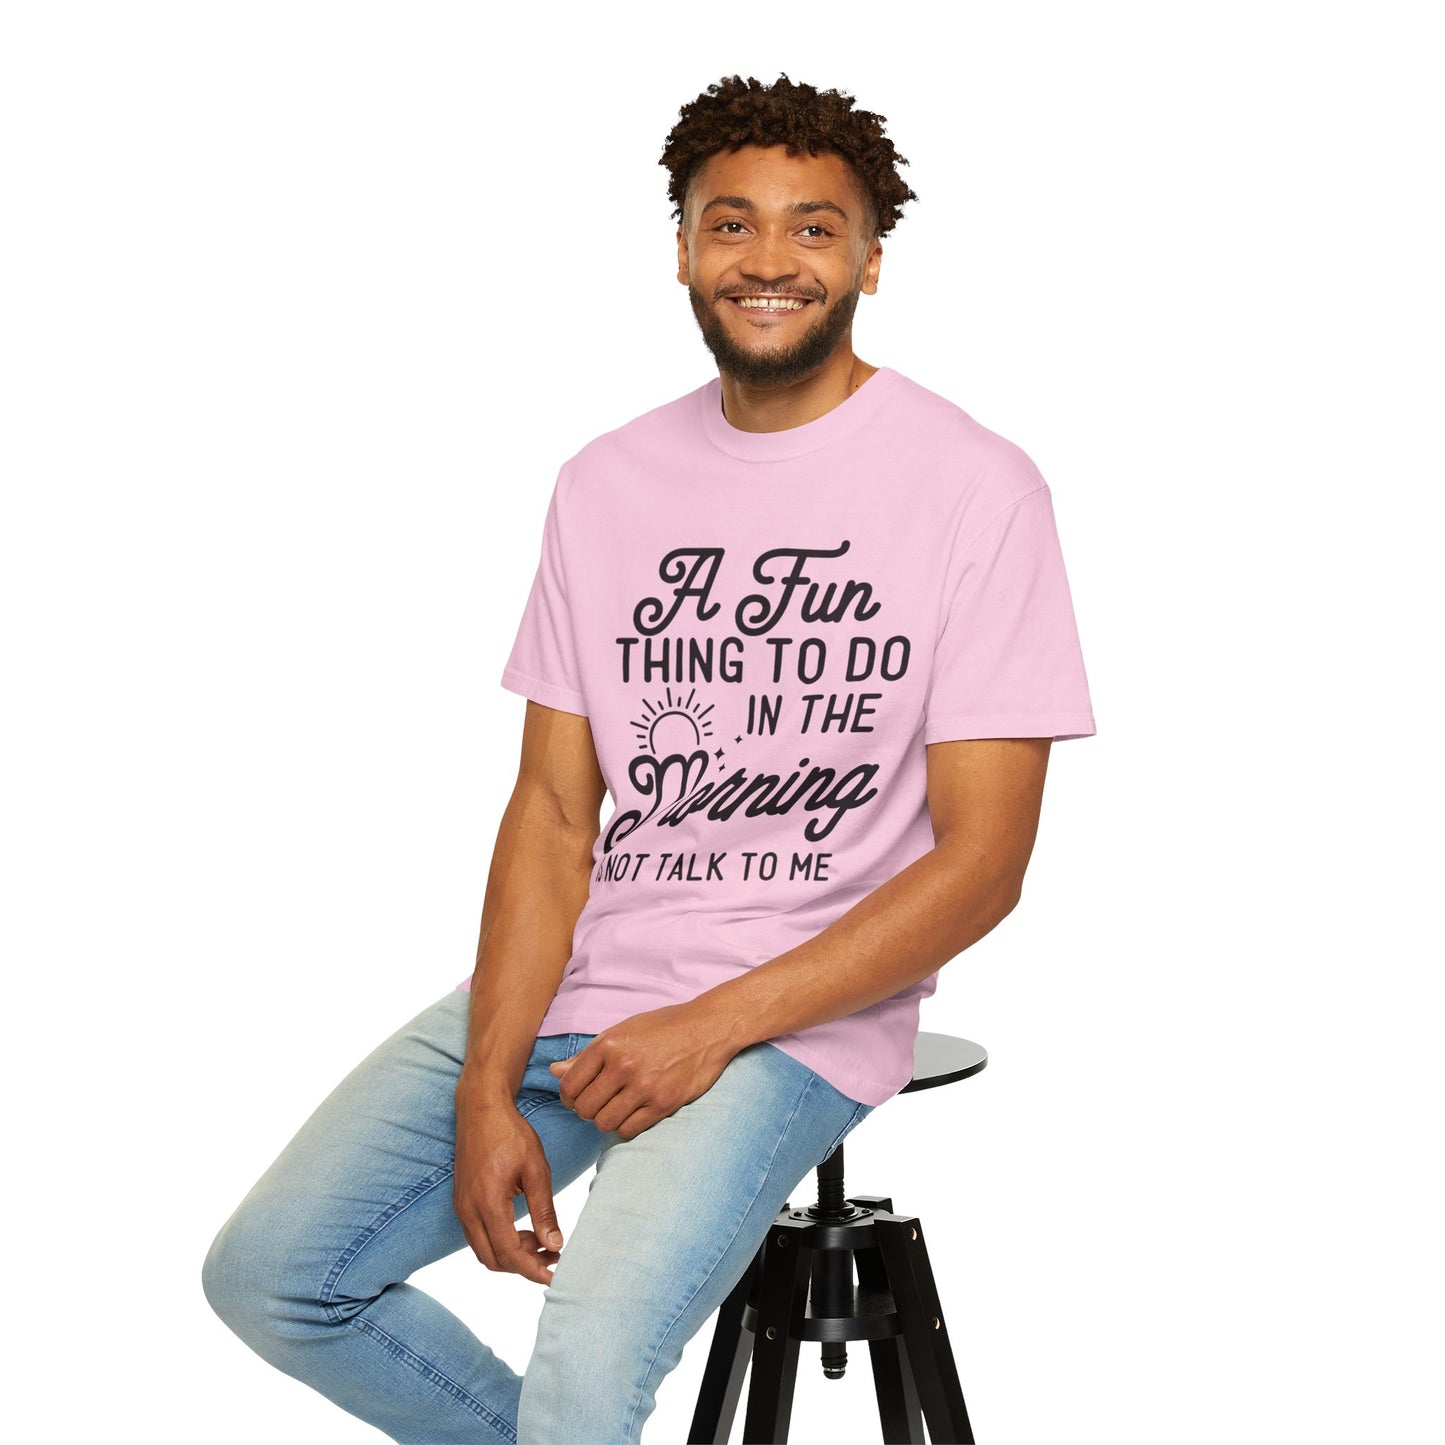 Don't talk to me in the morning - Unisex Garment-Dyed T-shirt